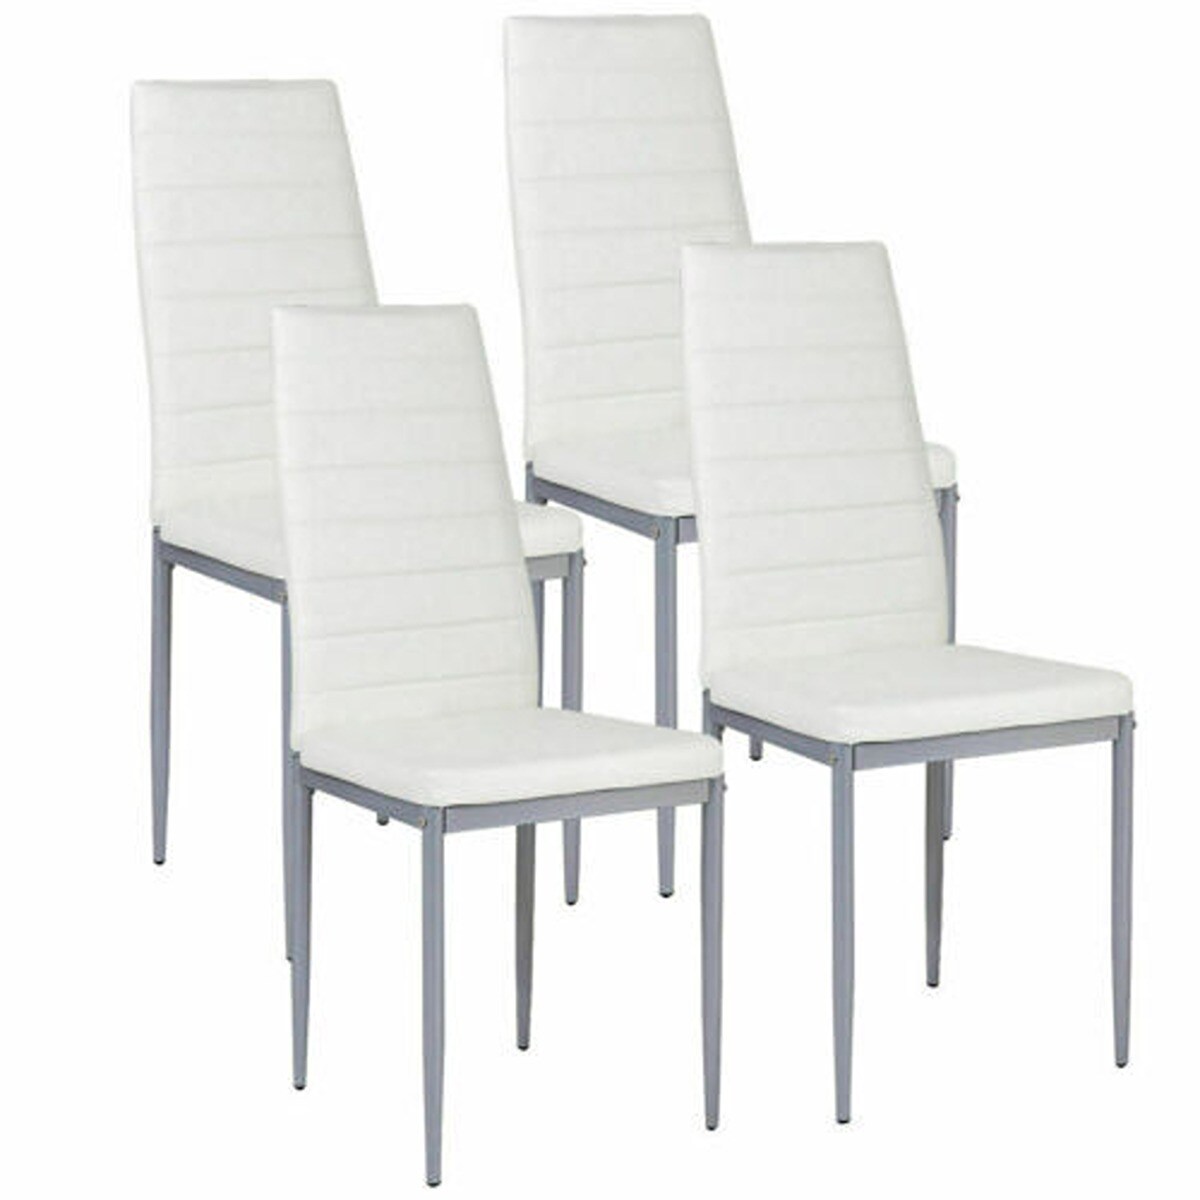 Durable Dining Table with 4 Leather Chairs 